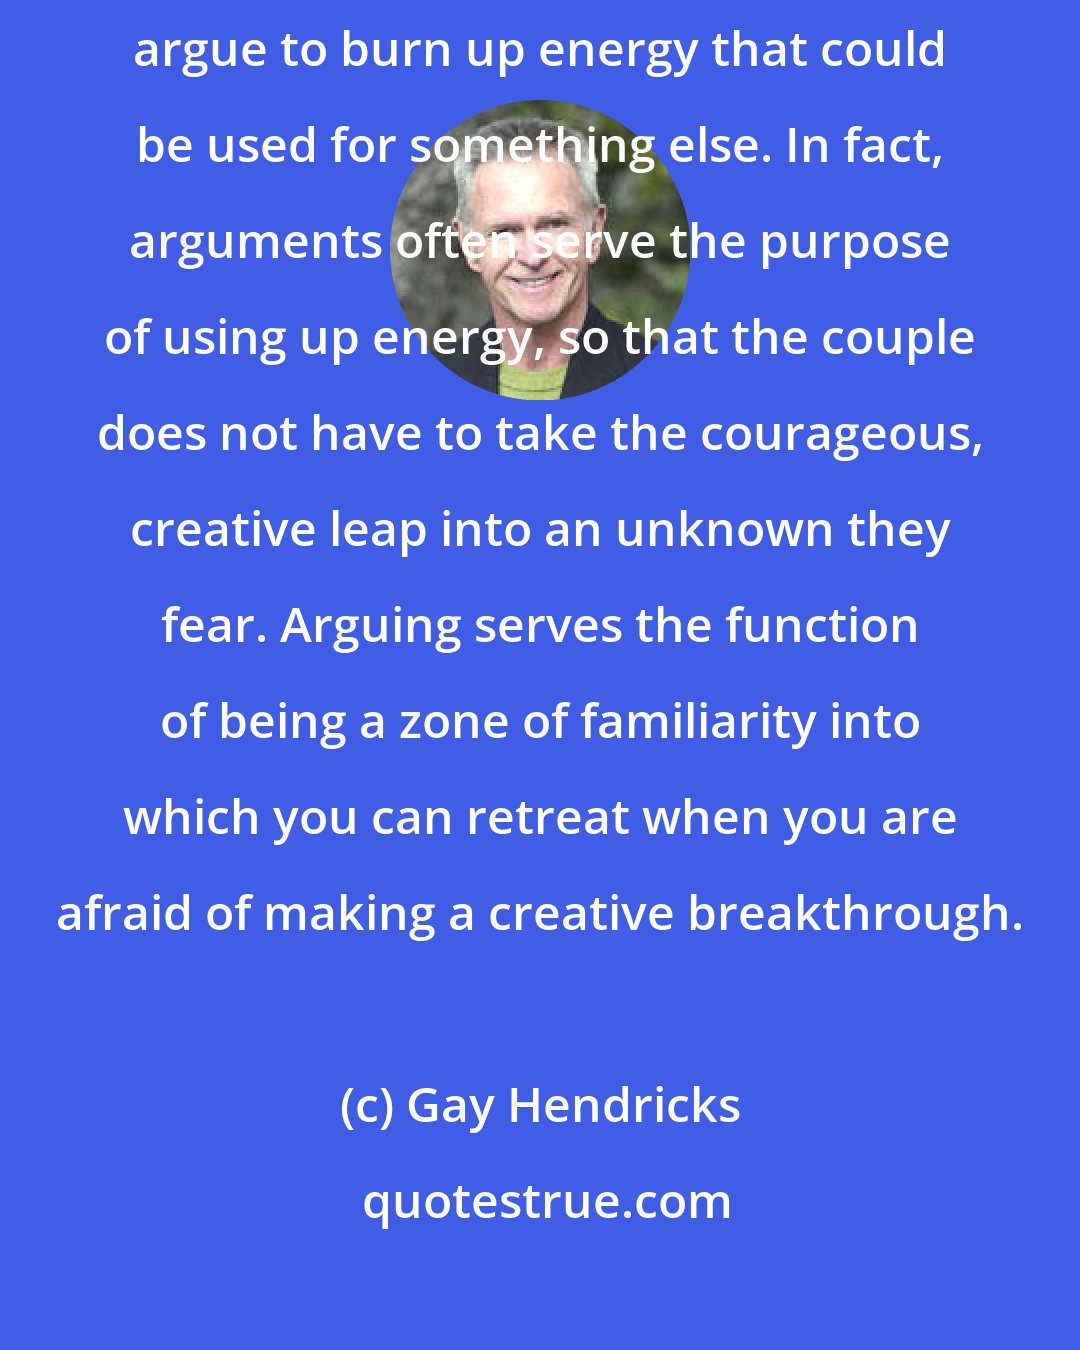 Gay Hendricks: One of the first things a relationship therapist learns is that couples argue to burn up energy that could be used for something else. In fact, arguments often serve the purpose of using up energy, so that the couple does not have to take the courageous, creative leap into an unknown they fear. Arguing serves the function of being a zone of familiarity into which you can retreat when you are afraid of making a creative breakthrough.